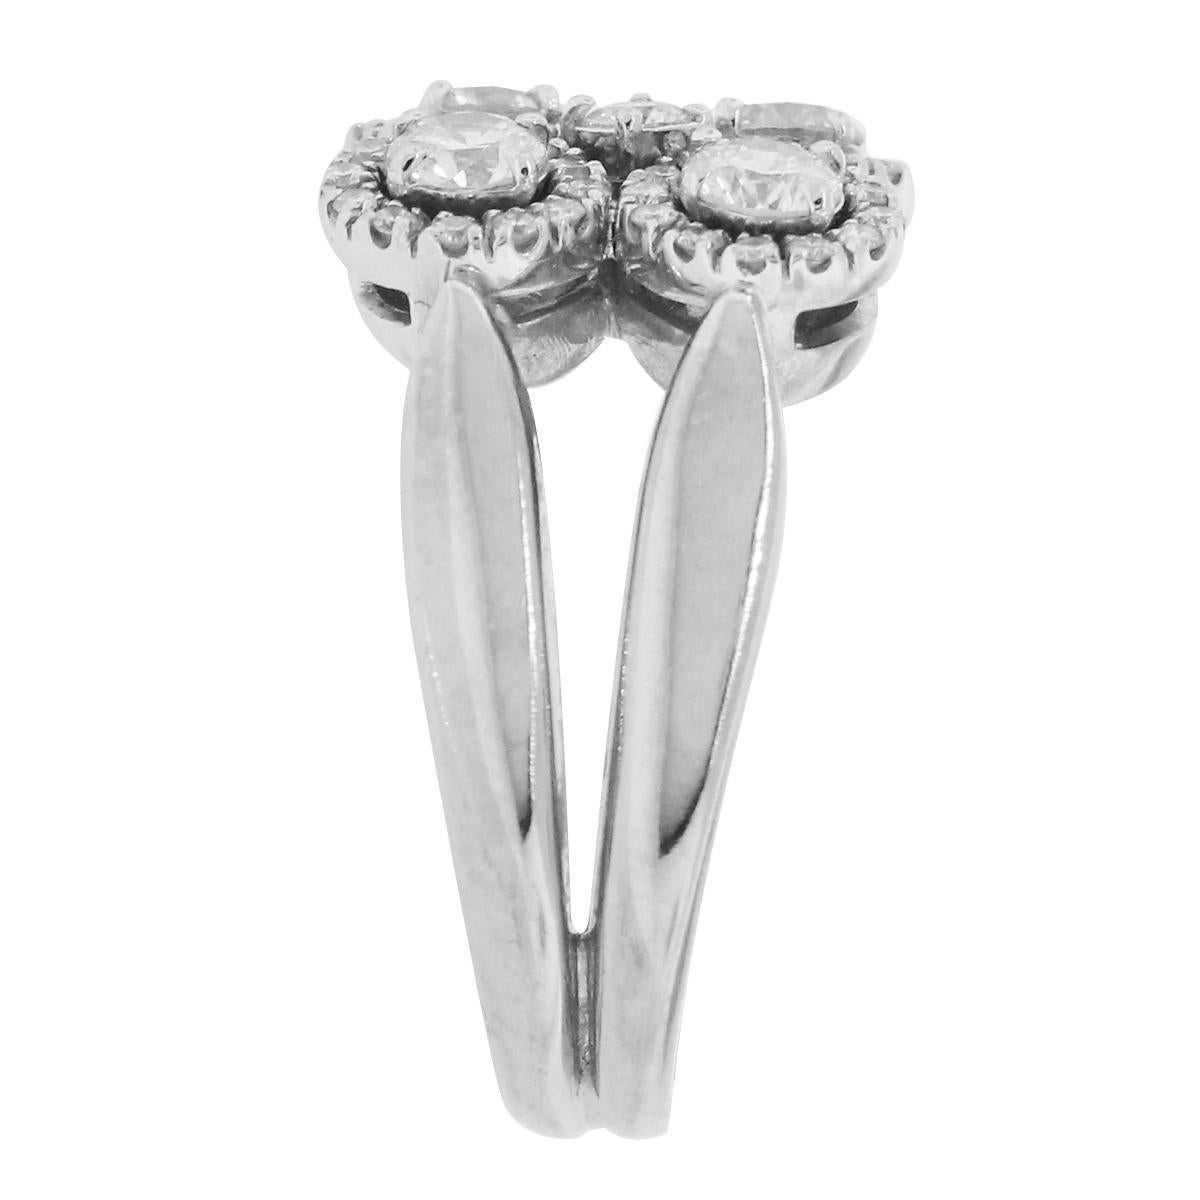 Material: 18k White Gold
Diamond Details: Approximately 2ctw round brilliant diamonds. Diamonds are G/H in color and SI in clarity.
Ring Size: 9 (can be sized)
Total Weight: 13.6g (8.8dwt)
Measurements: 0.80